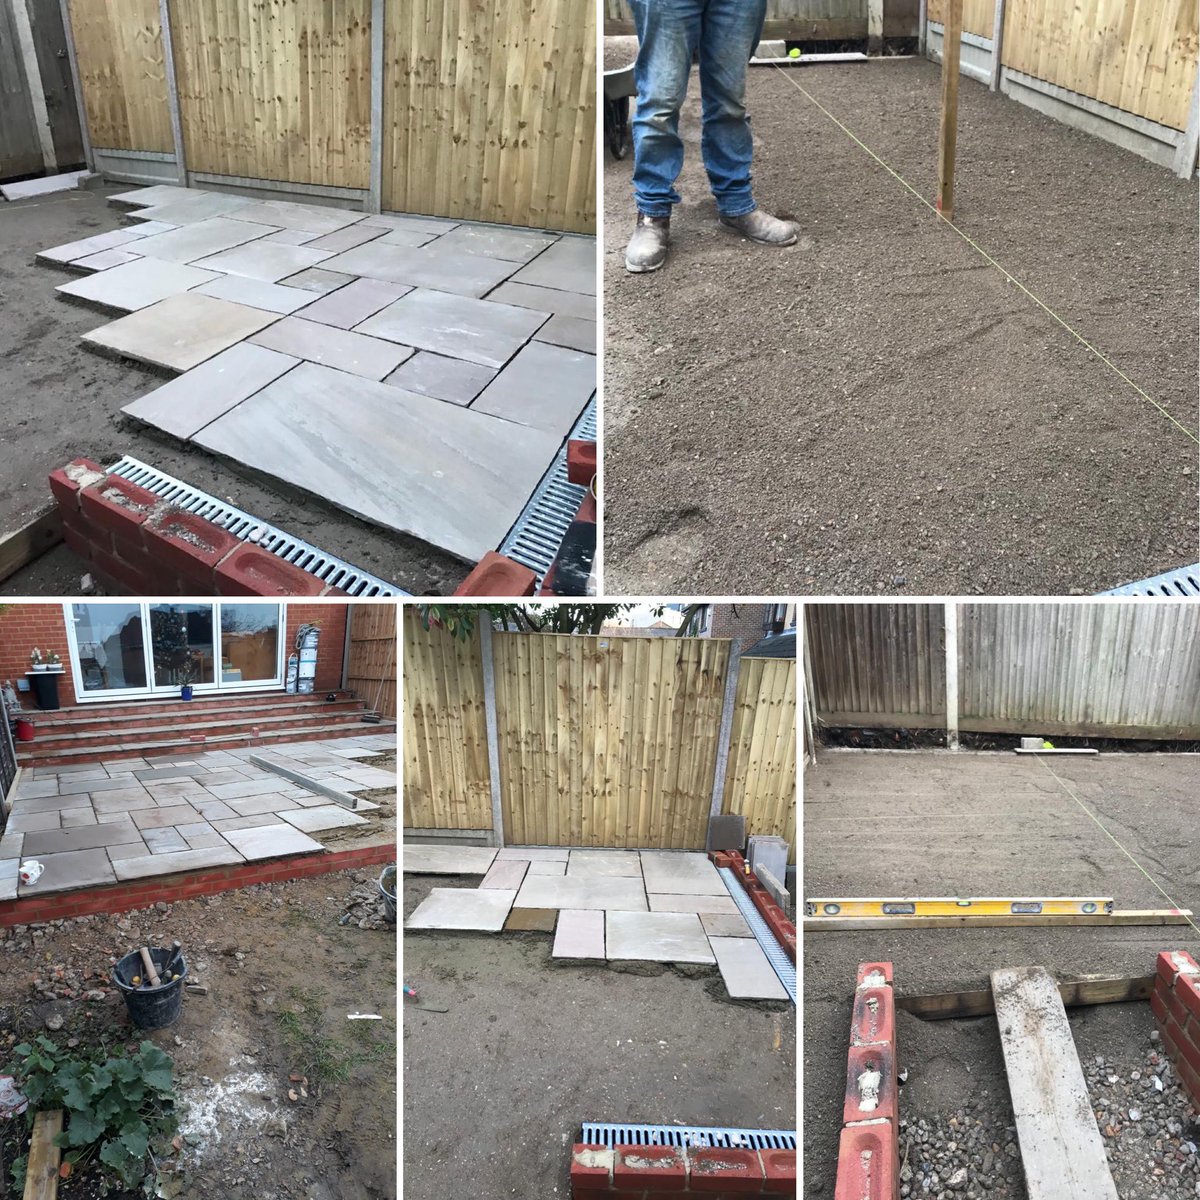 Paving the garden in #canarywarf house. Contact us on 0203 323 0017 or email us at info@clearthelot.com #gardenbeforeandafter #gardenplan #gardenprojects #gardenlandscaping #gardenstyling #gardeninginspiration #gardendesignideas #homegardens #gardendesigns #gardeningislife